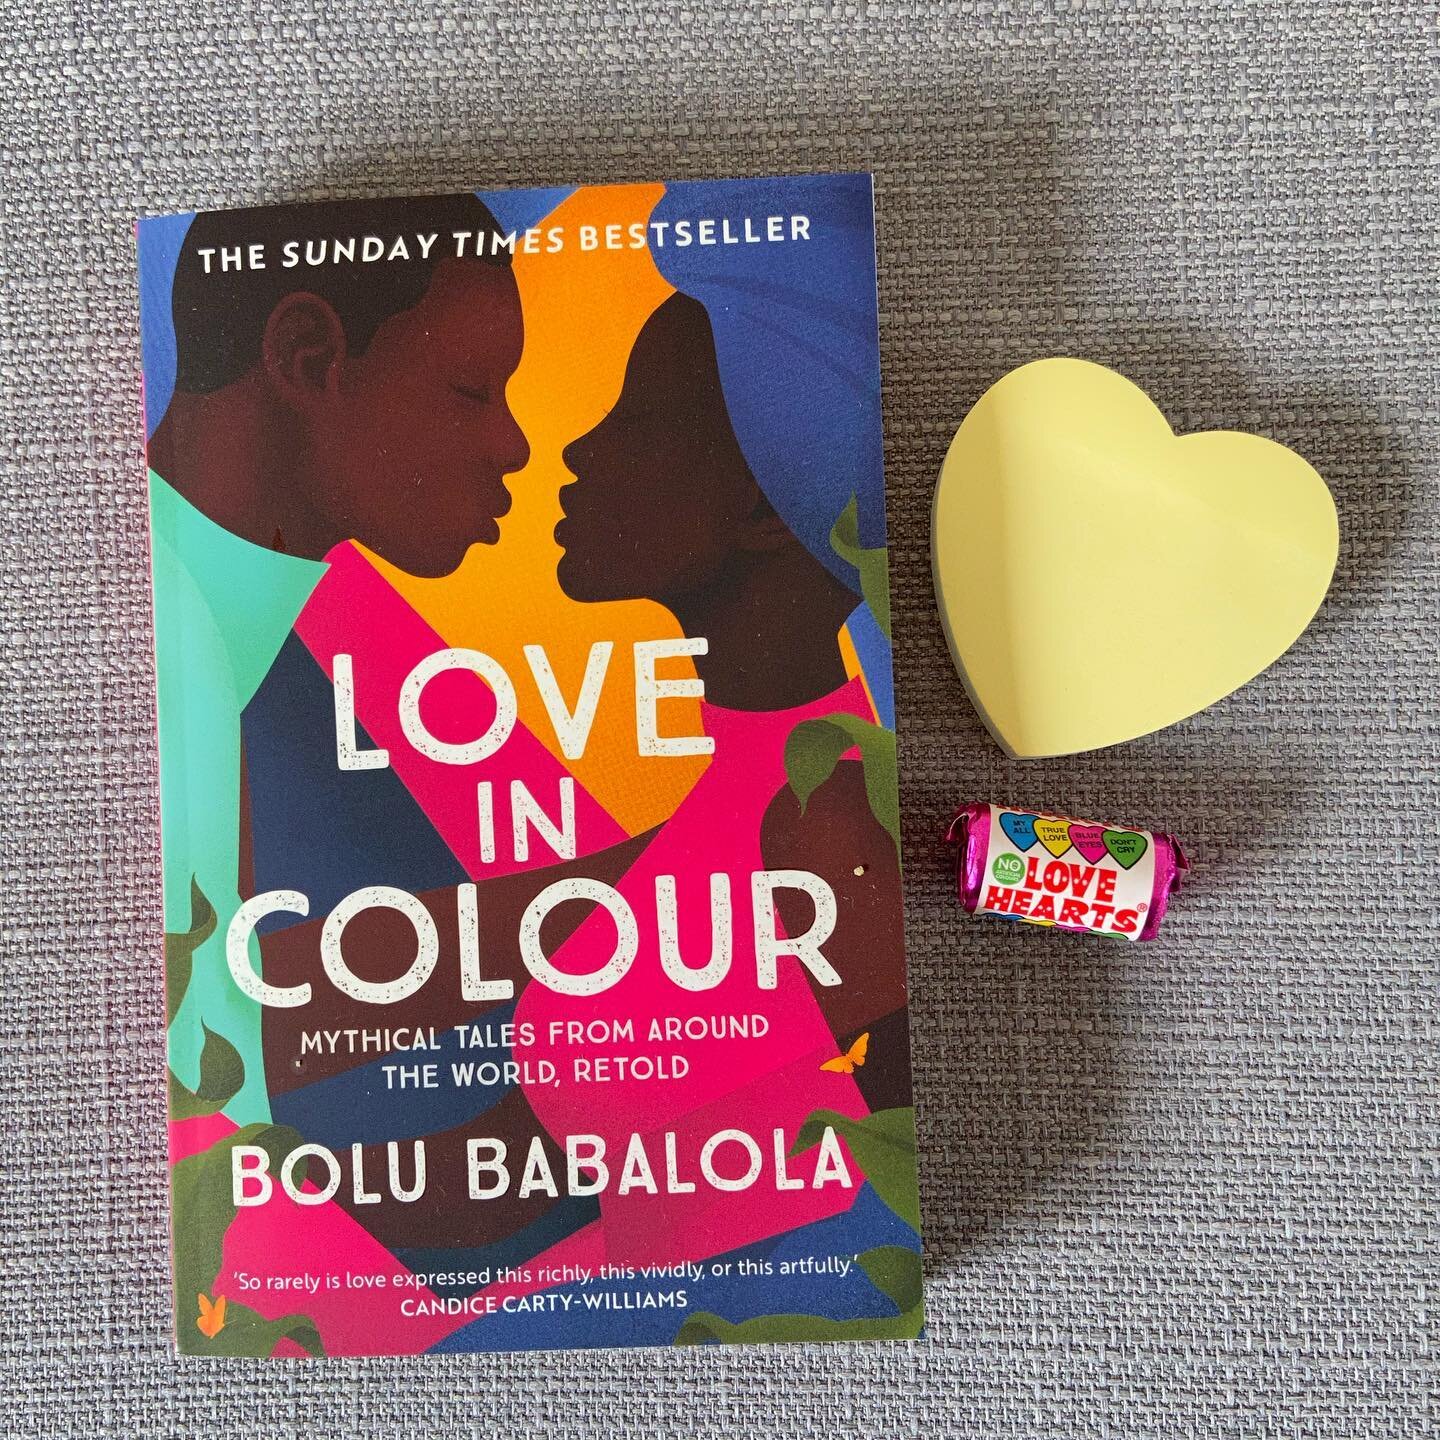 Huge thanks to @jessicafarrugiapr for this gorgeous #LoveinColour package. What a cover! @headlinebooks